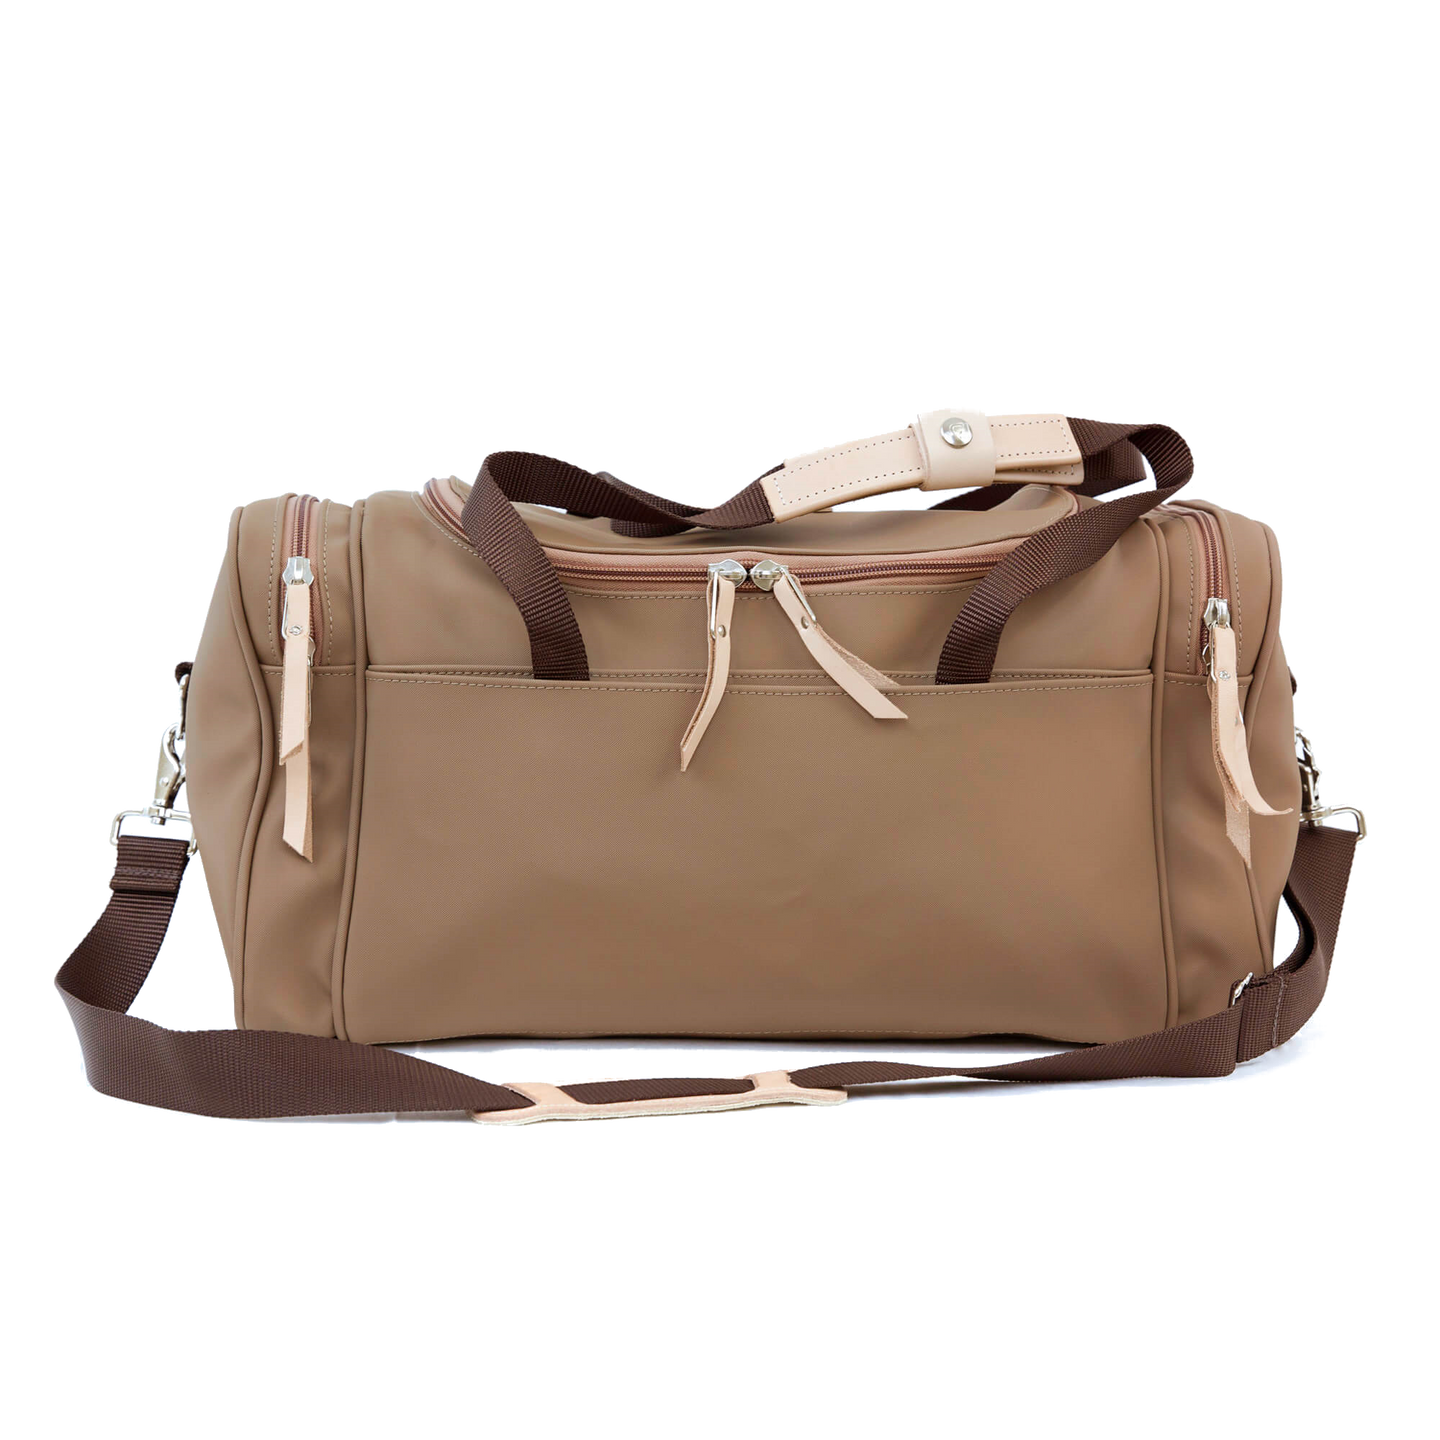 Small Square Duffel - Saddle Coated Canvas Front Angle in Color 'Saddle Coated Canvas'